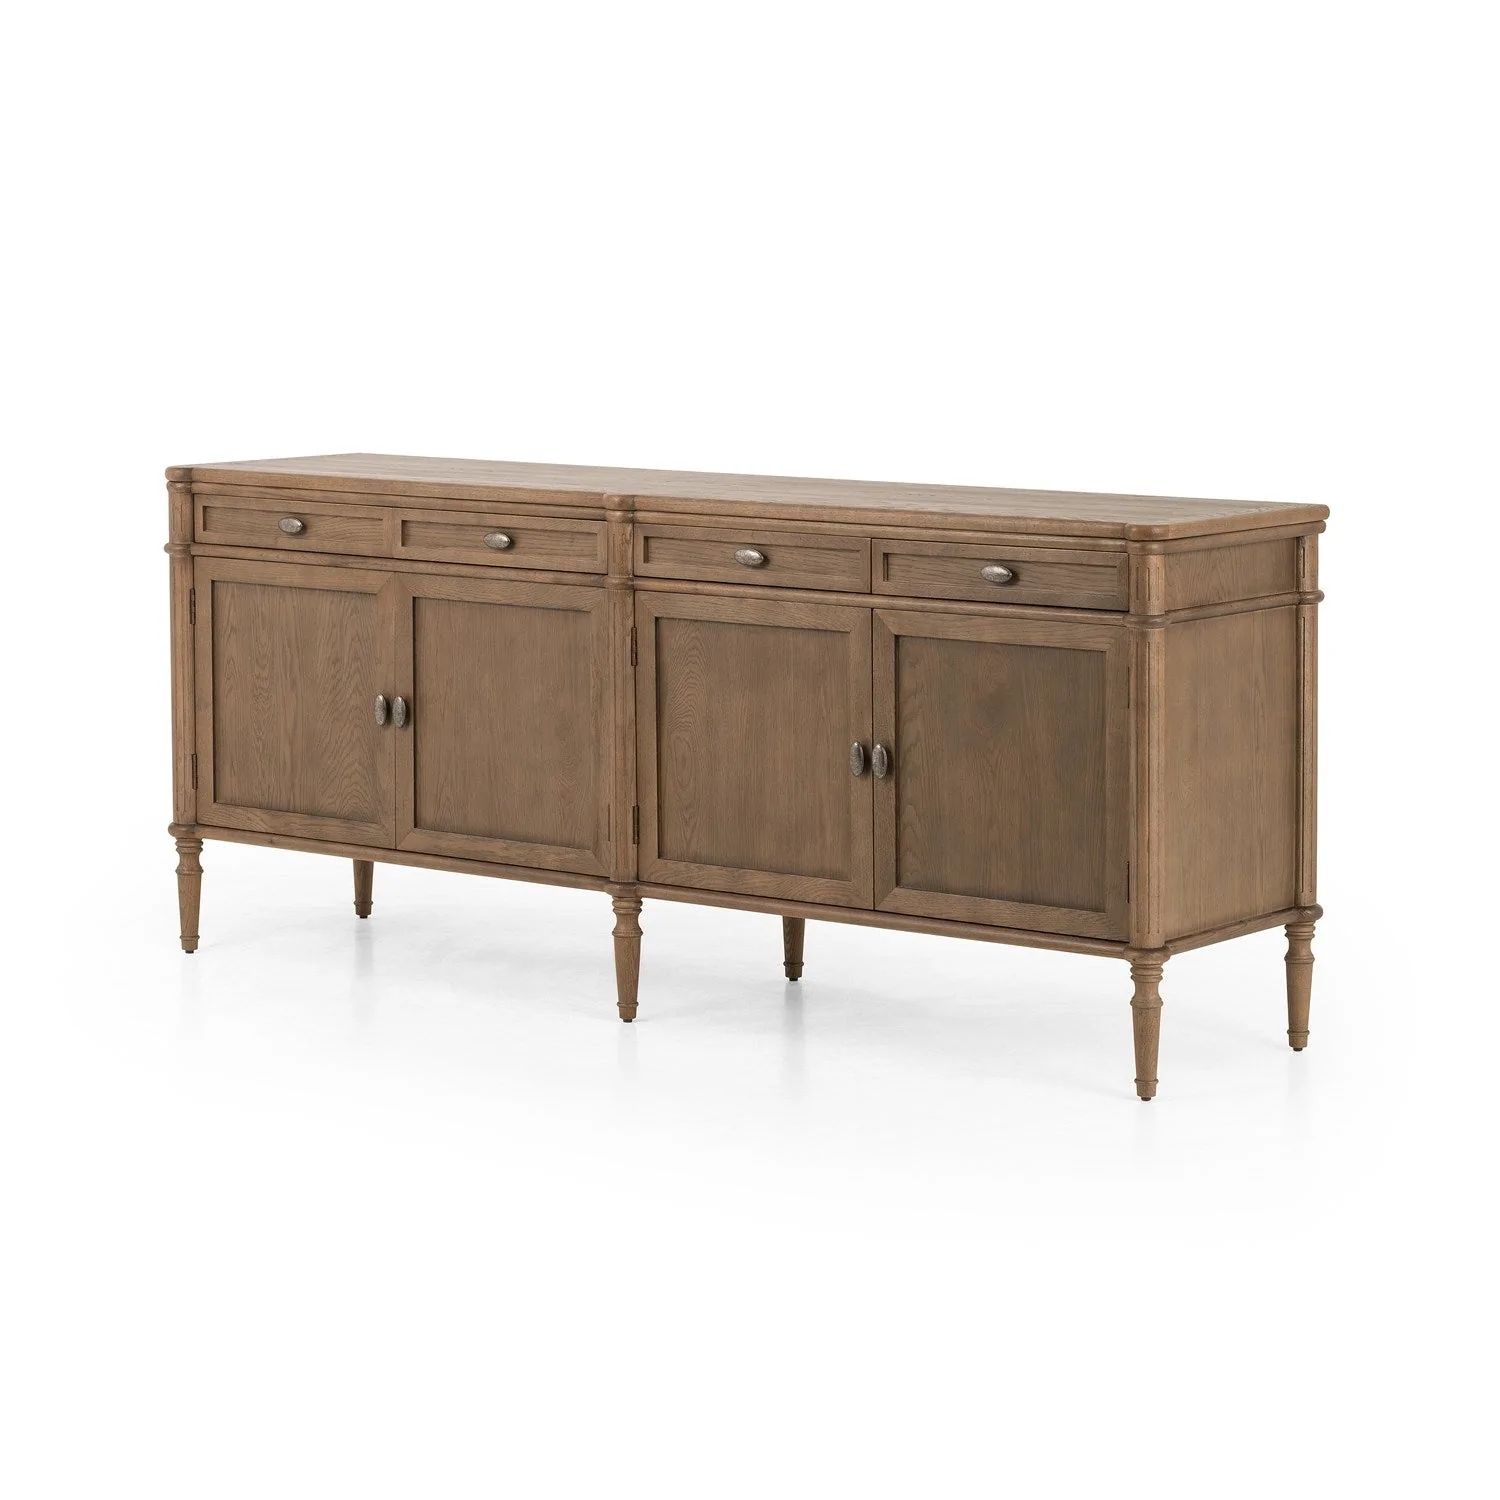 Toulouse Sideboard | Burke Decor